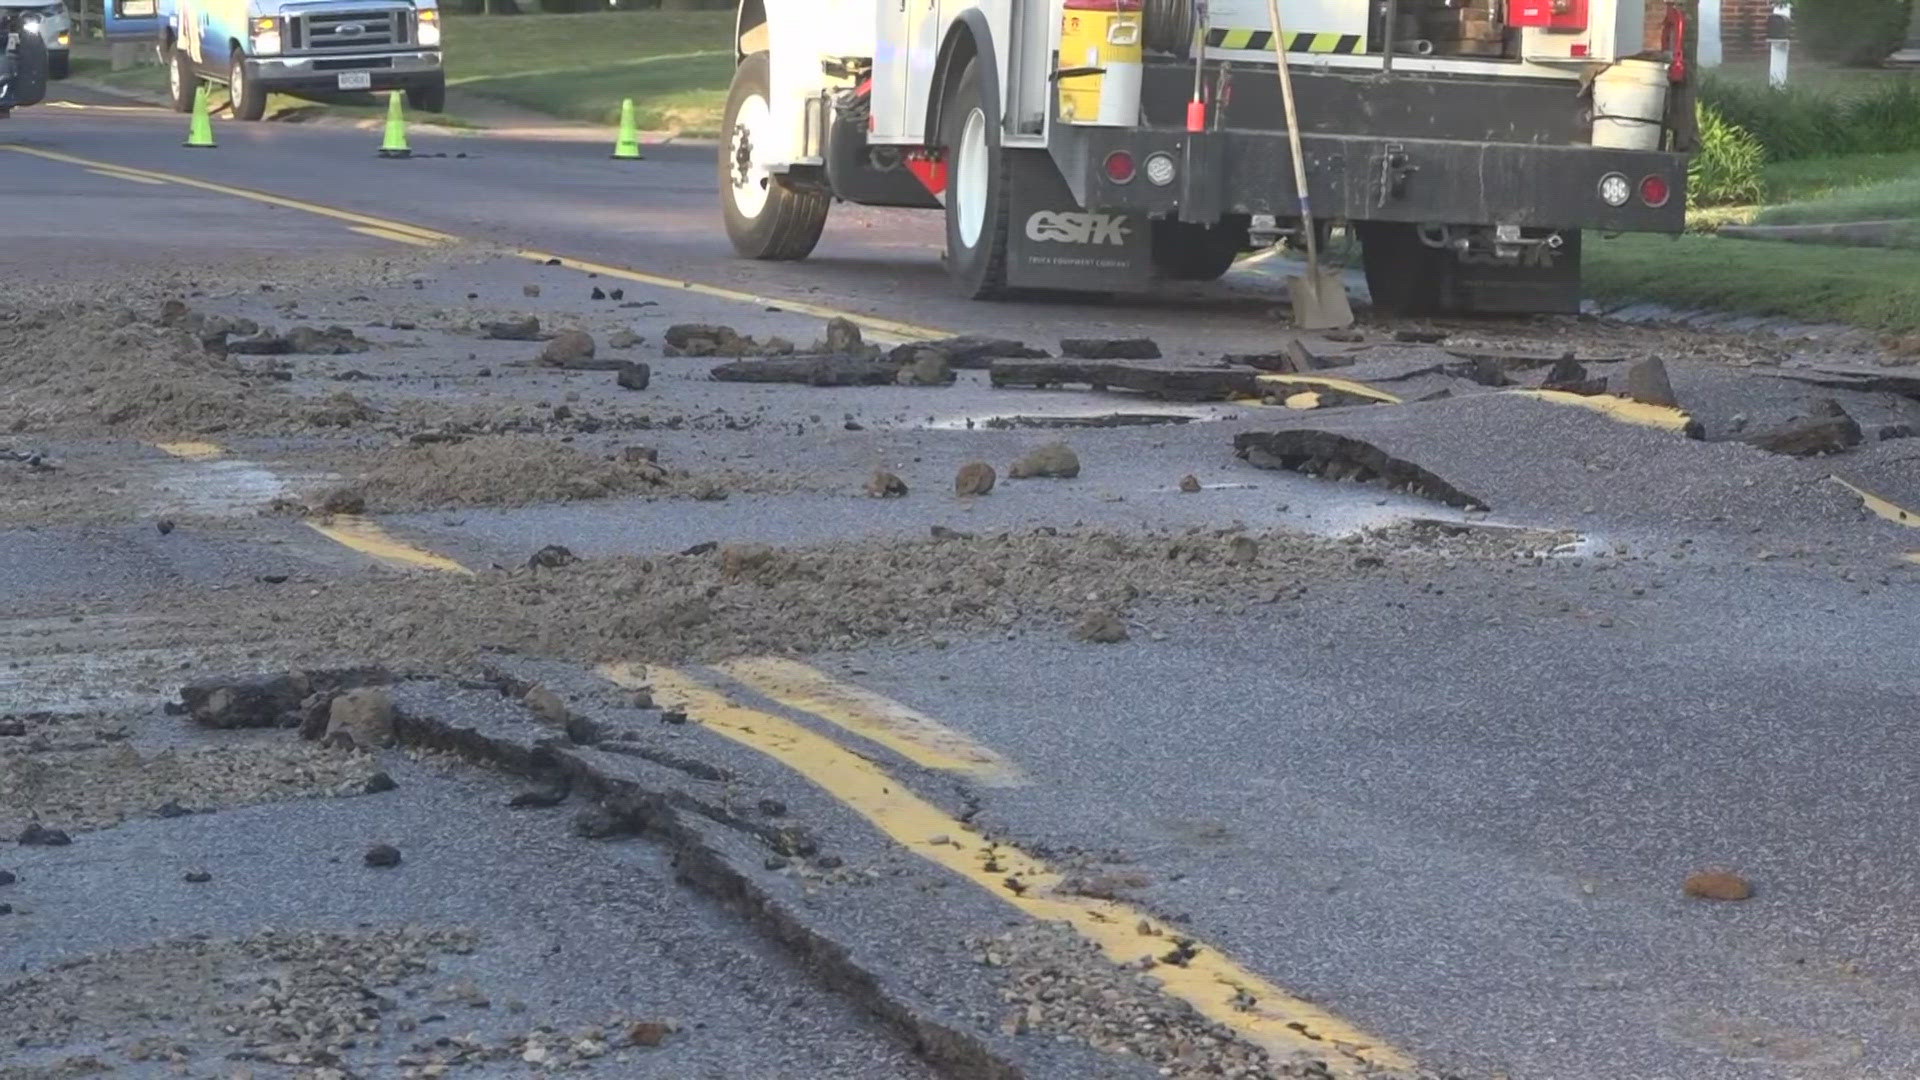 McKelvey Road is closed from Roth Hill to Redcoat drives after a water main break damaged the pavement Friday morning. The water main was reported before 6 a.m.